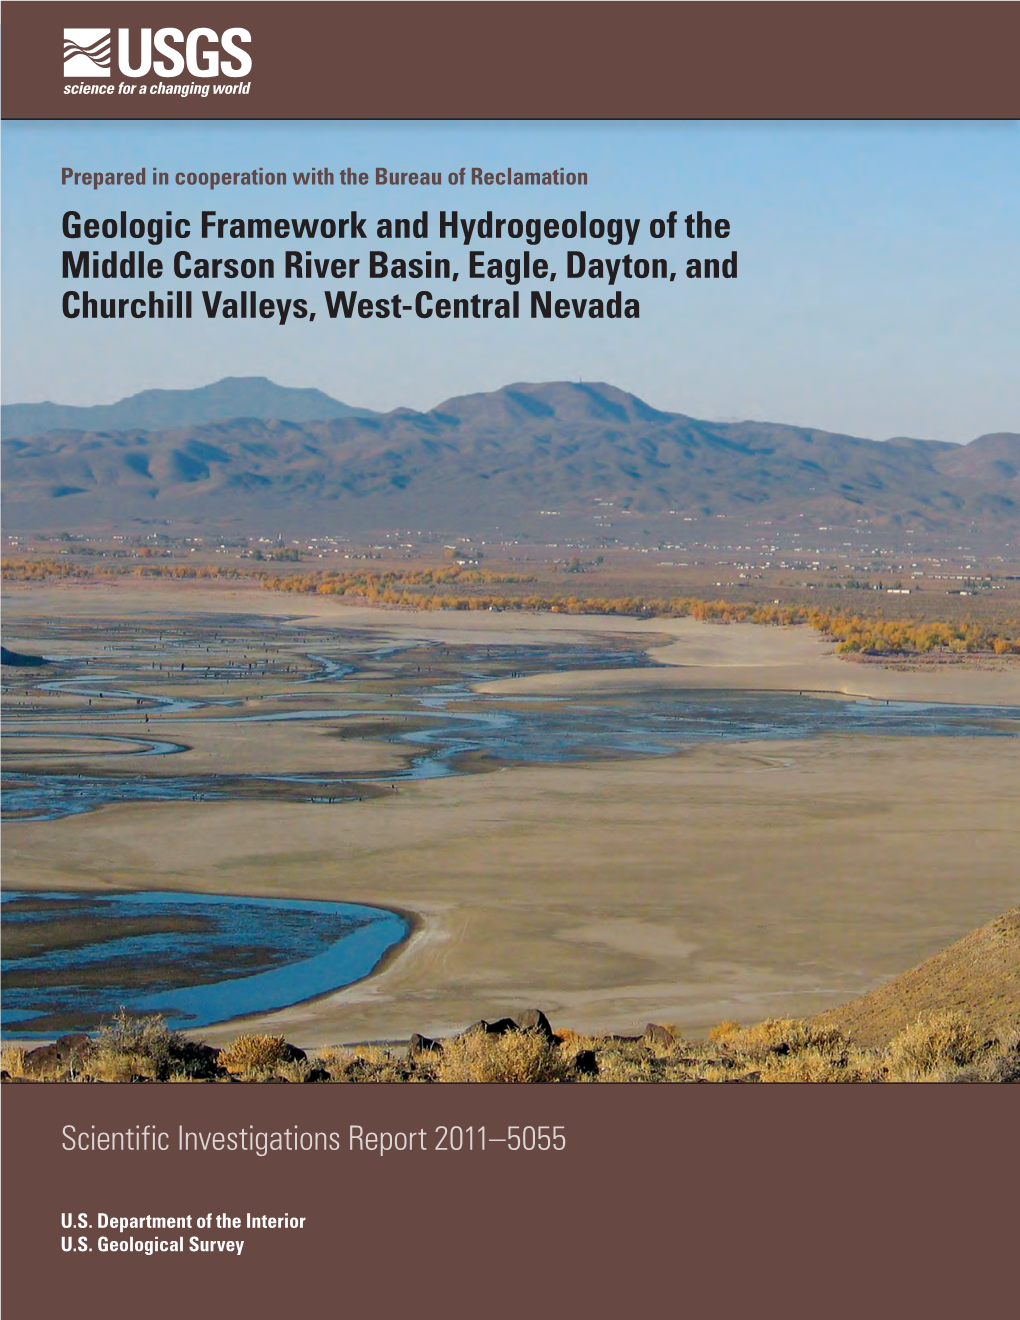 Geologic Framework and Hydrogeology of the Middle Carson River Basin, Eagle, Dayton, and Churchill Valleys, West-Central Nevada